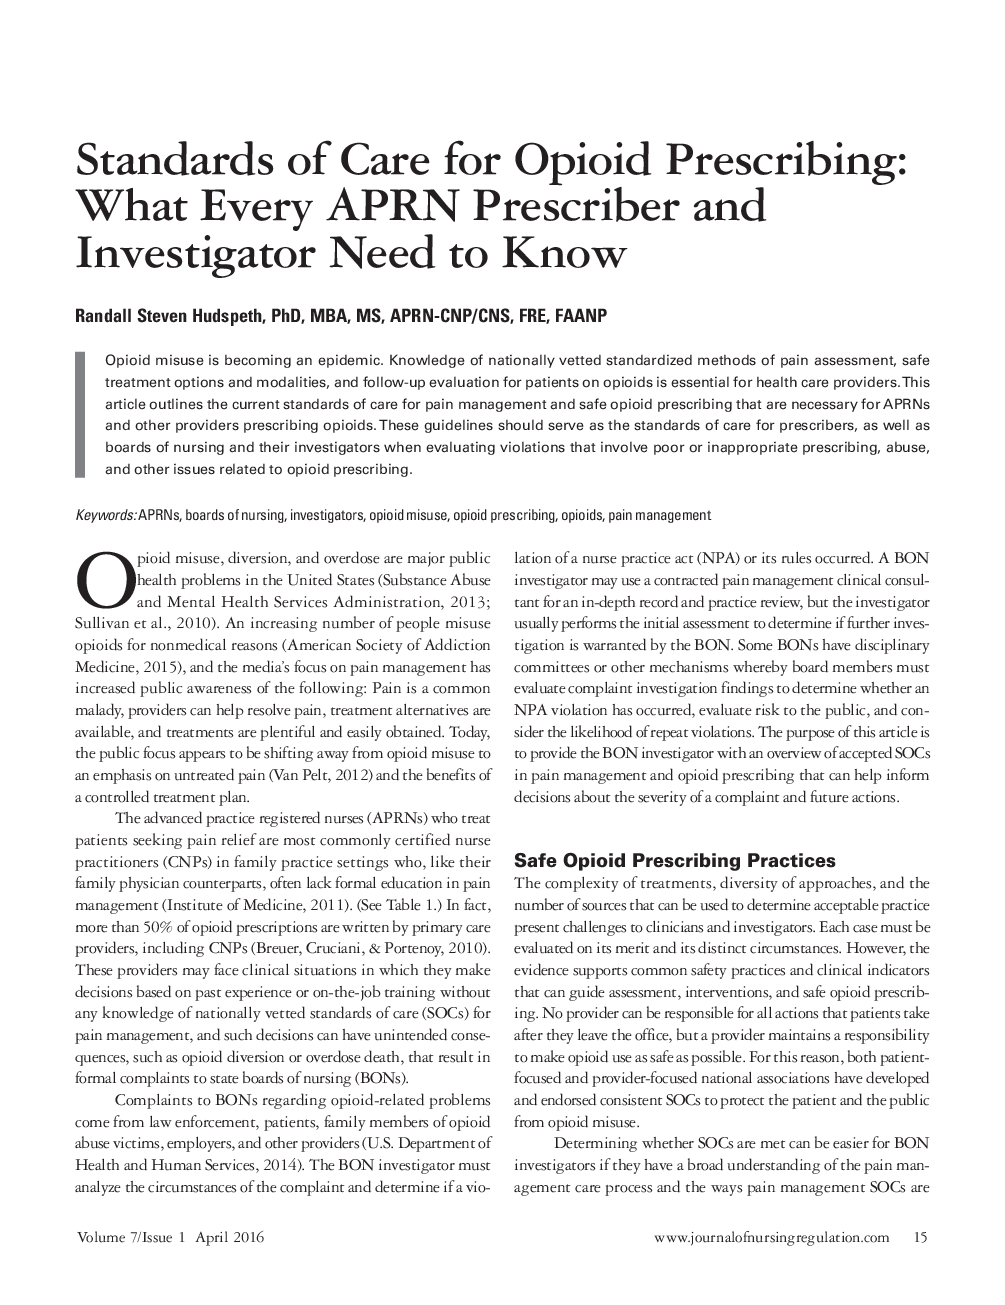 Standards of Care for Opioid Prescribing: What Every APRN Prescriber and Investigator Need to Know